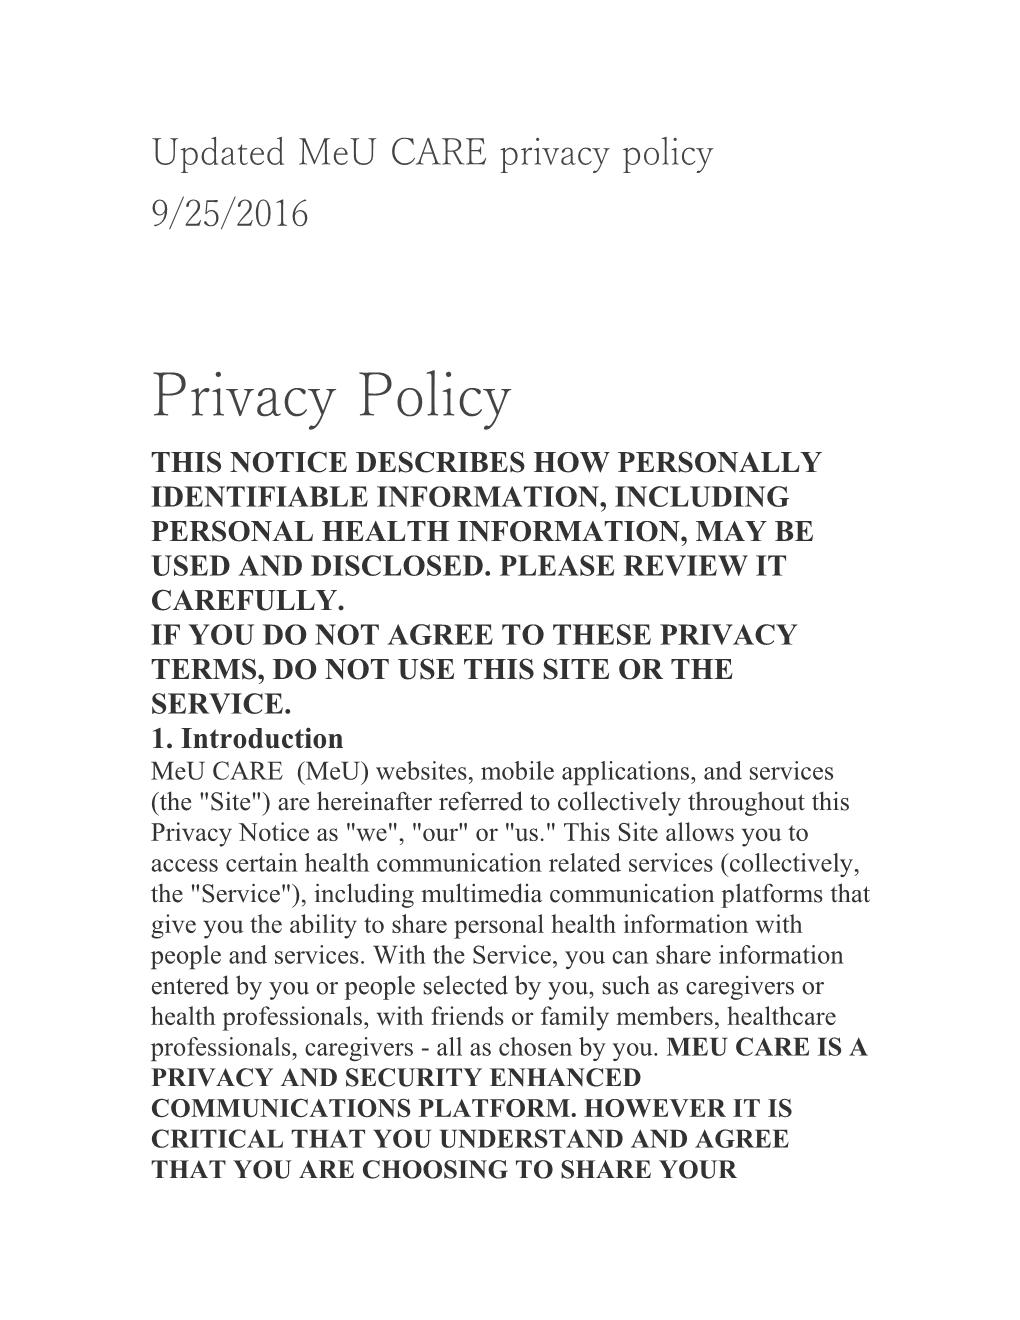 Updated Meu CARE Privacy Policy 9/25/2016